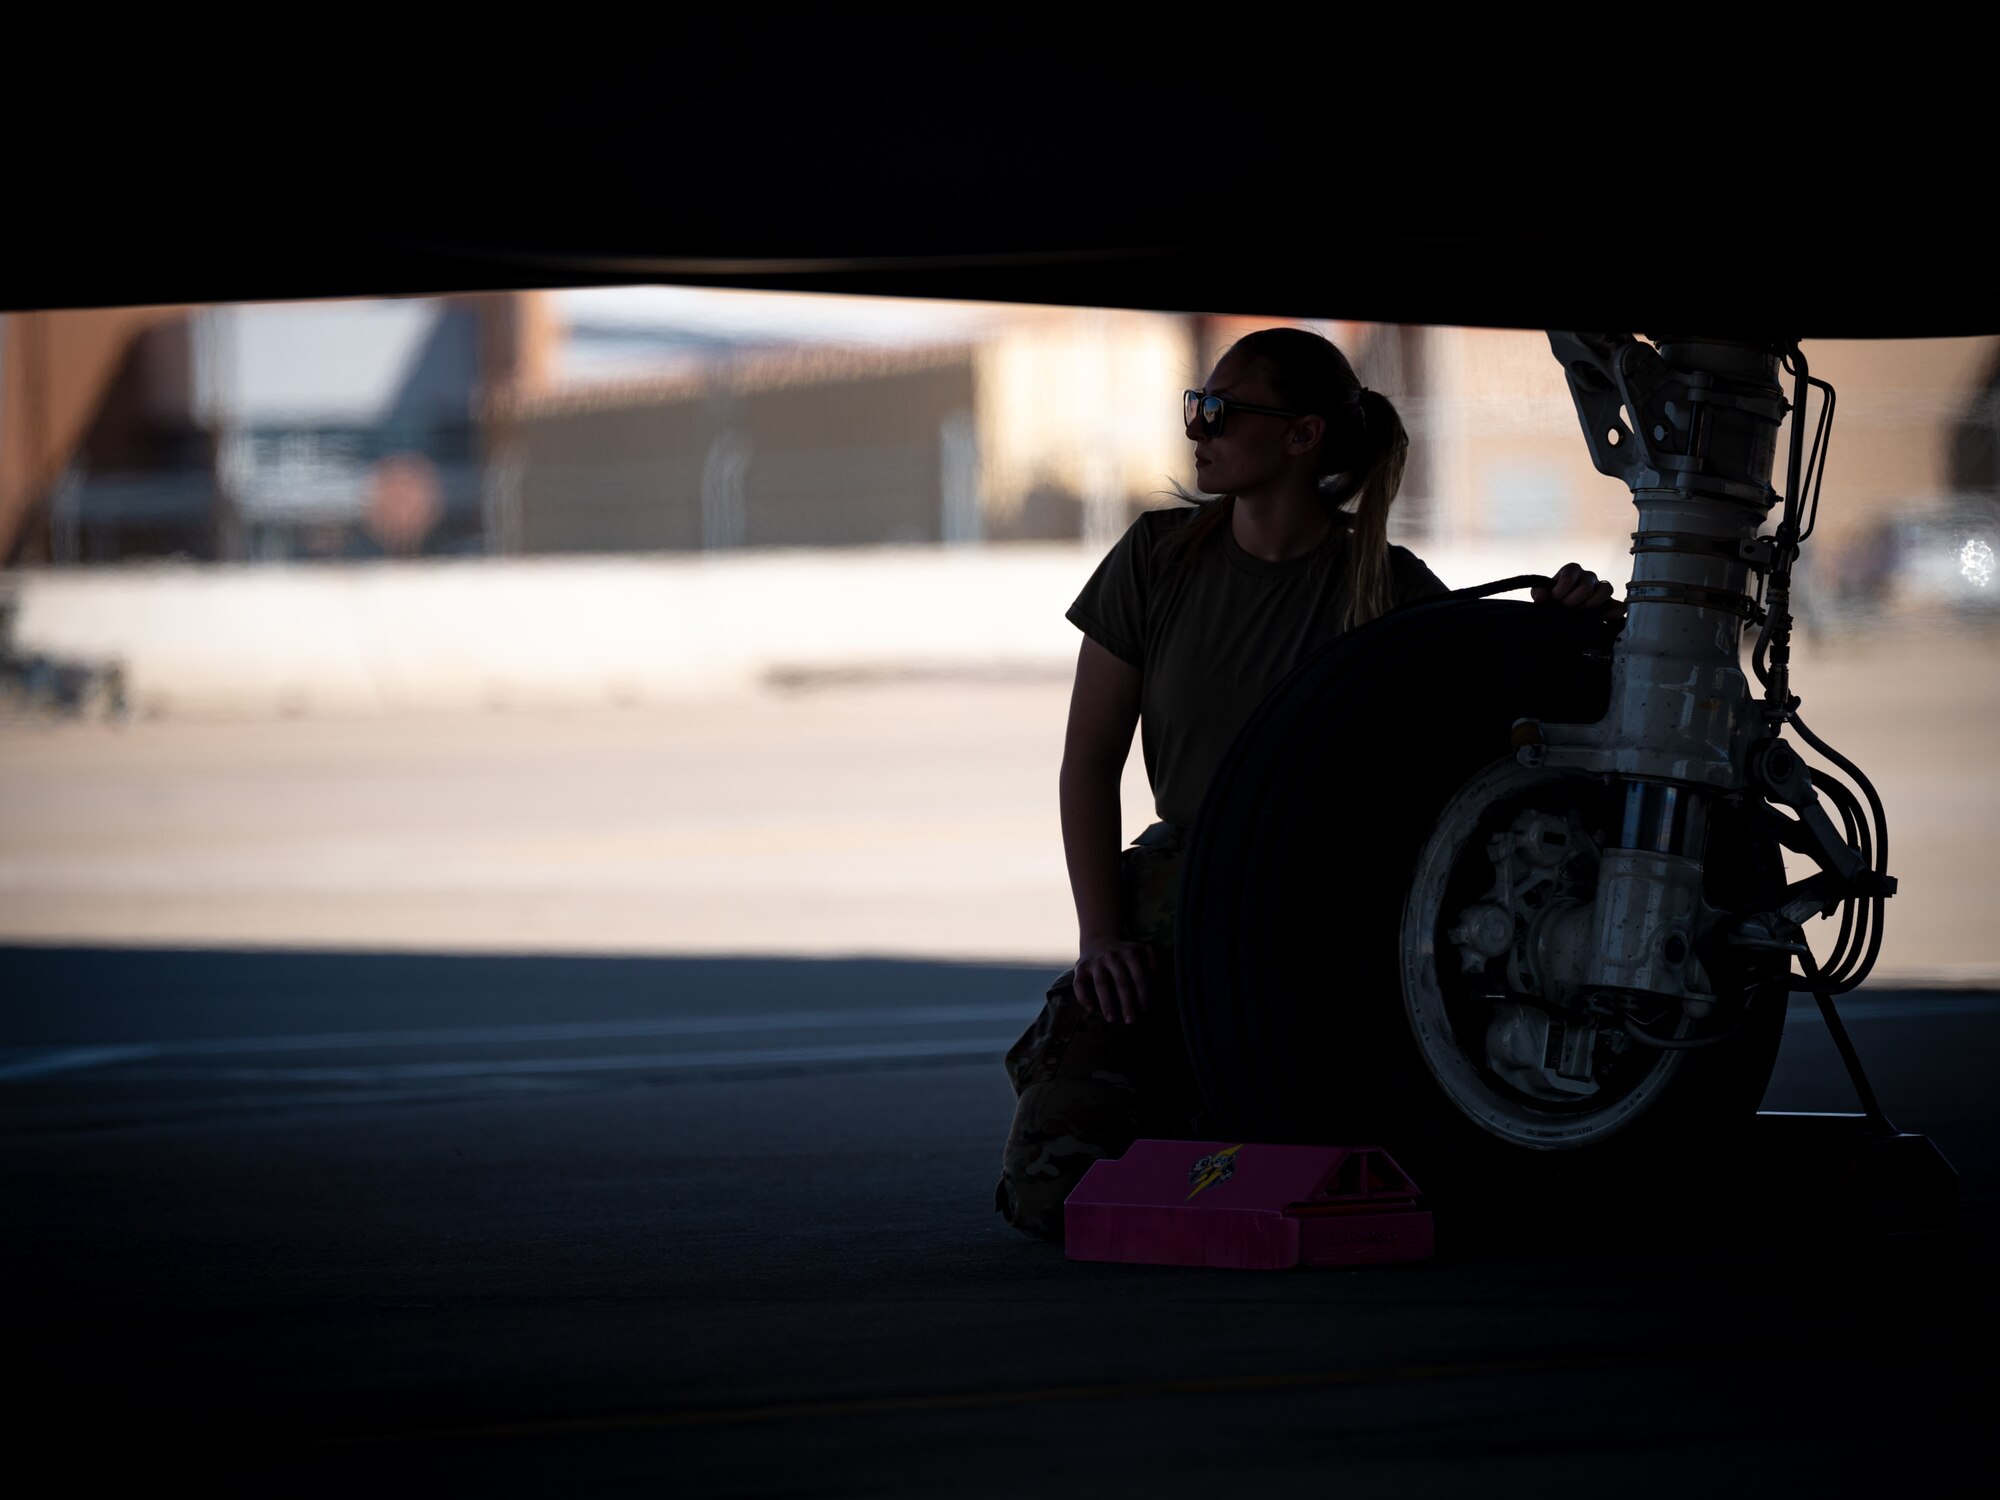 U.S. Air Force Airman Makenzie Milless, 62nd Fighter Squadron F-35 Lightning II crew chief, waits to pull wheel chocks before an F-35 sortie March 28, 2023, at Luke Air Force Base, Arizona.